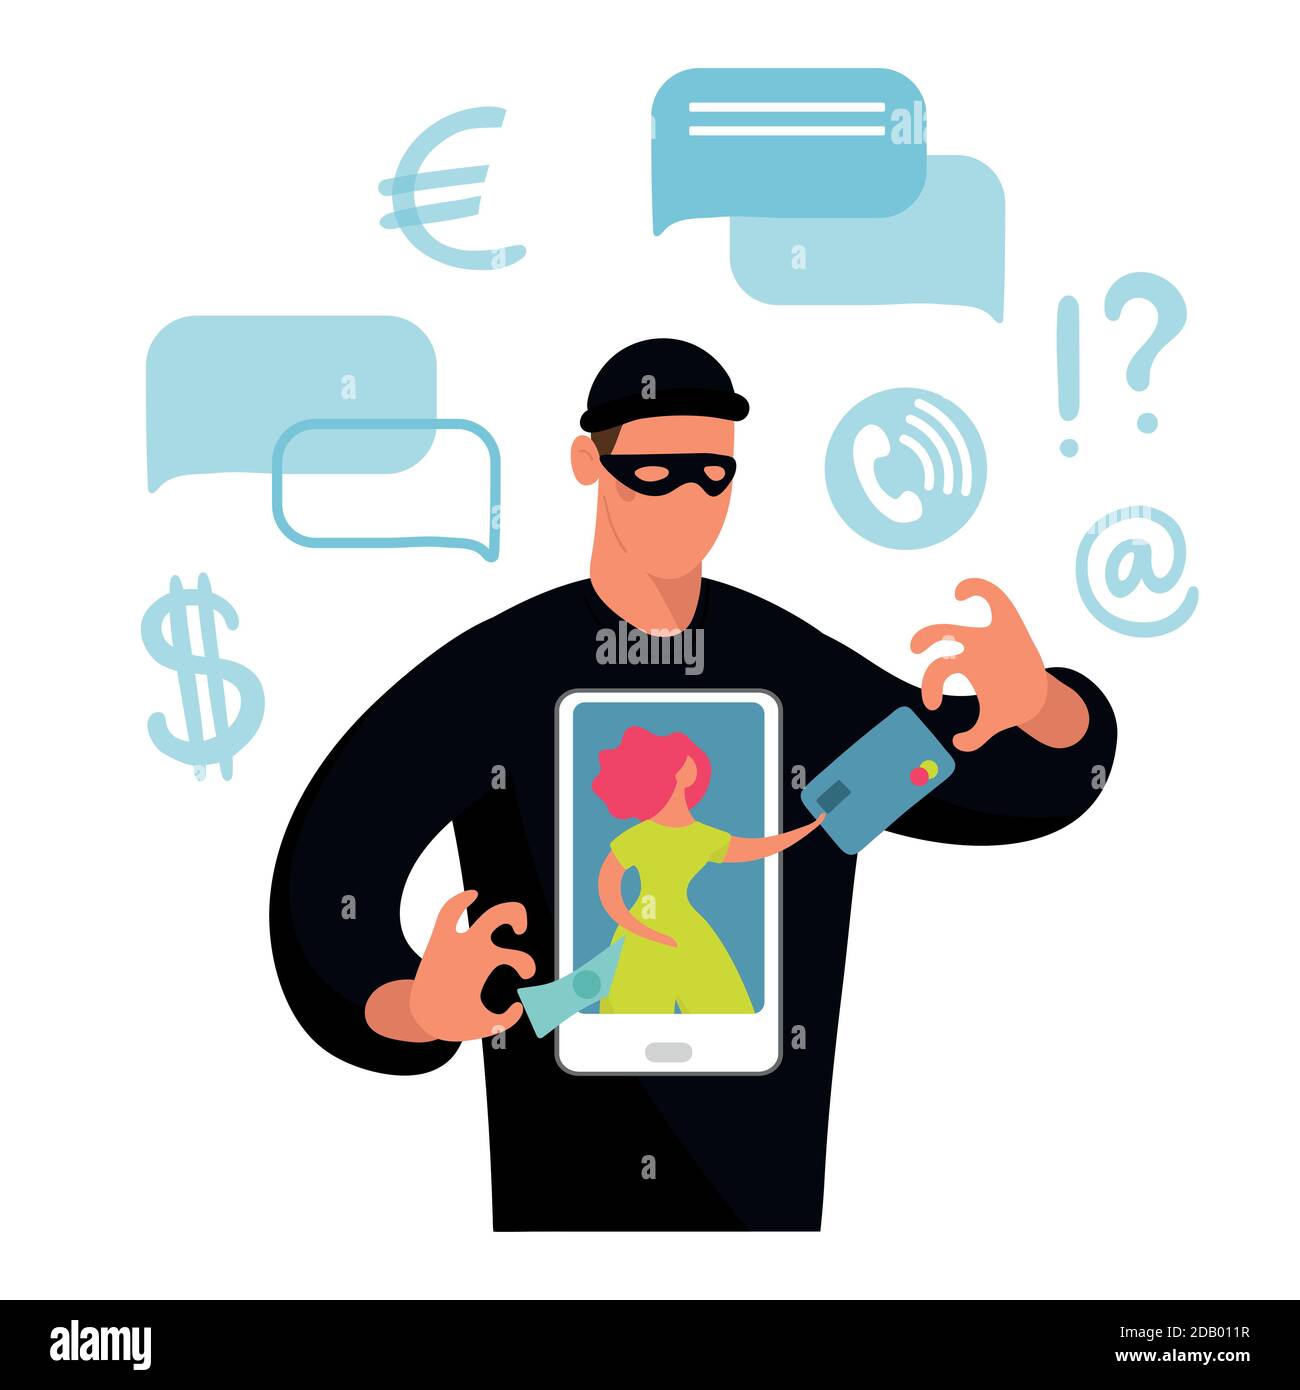 Conceptual illustration about online fraud, cybercrime, data hacking. The girl on the screen the phone and the dark silhouette of a fraudster stealing money and a bank card. Flat vector illustration Stock Vector